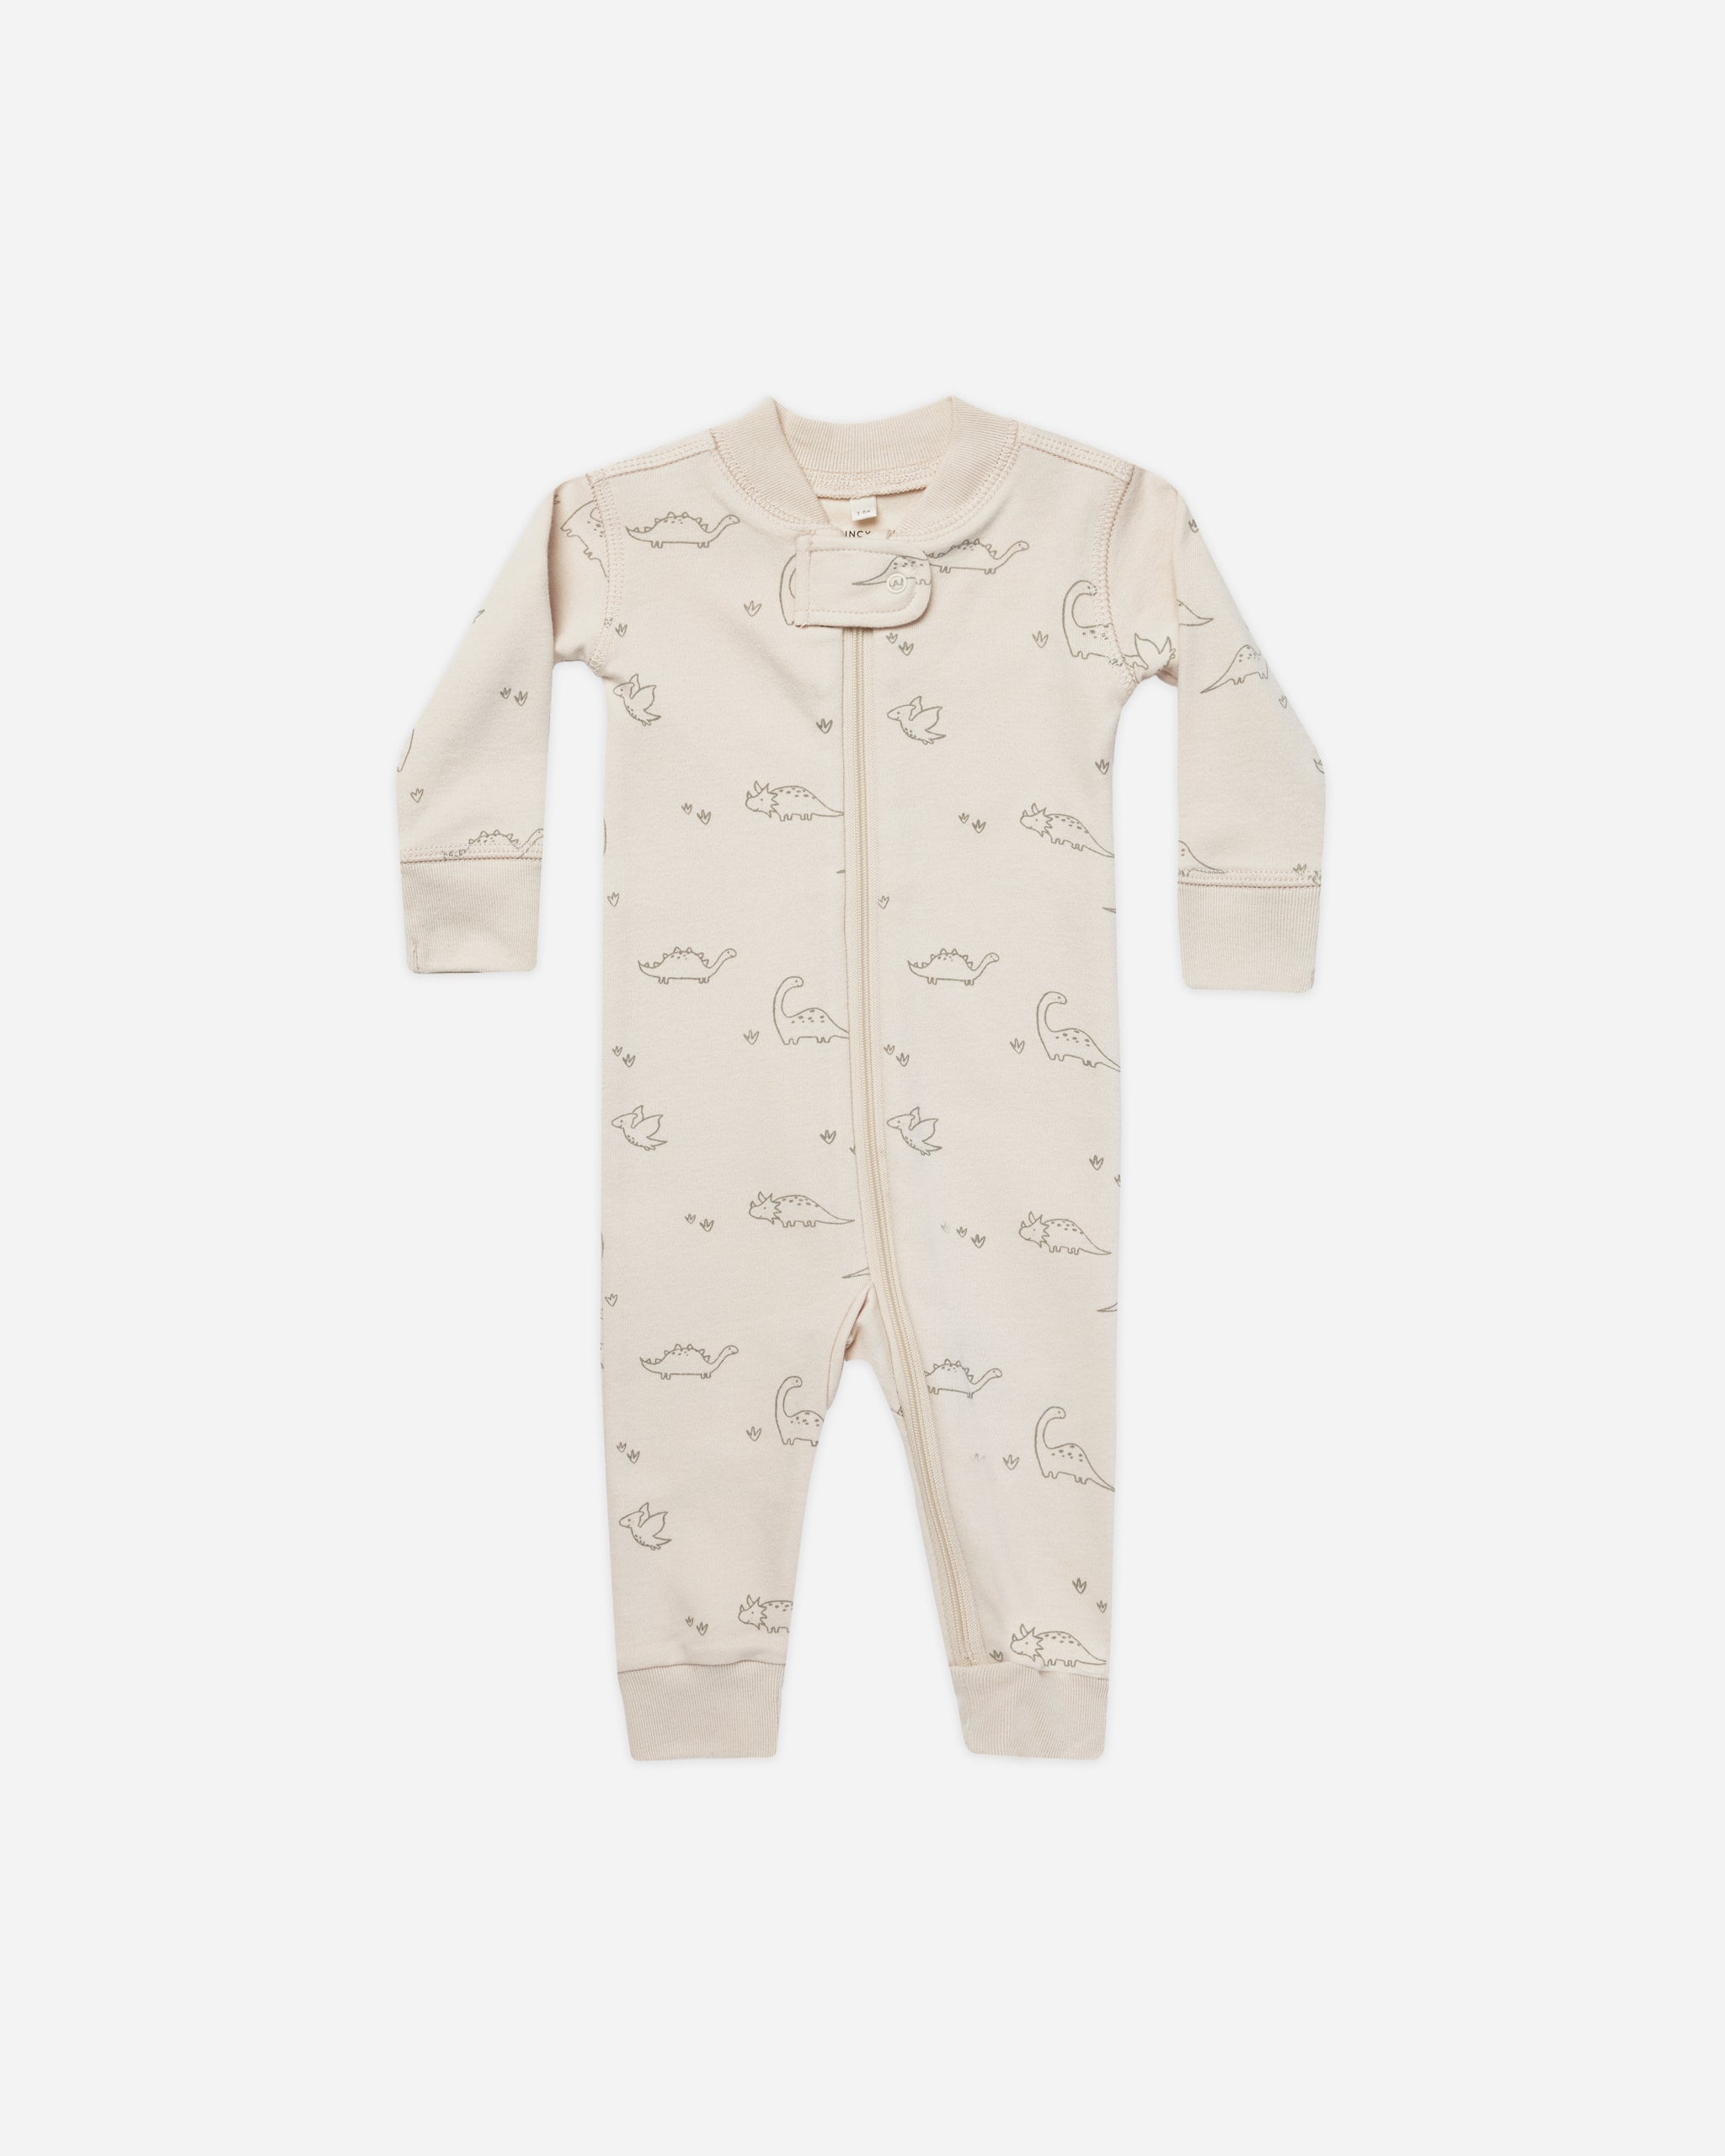 Zip Long Sleeve Sleeper || Dinos - Rylee + Cru | Kids Clothes | Trendy Baby Clothes | Modern Infant Outfits |